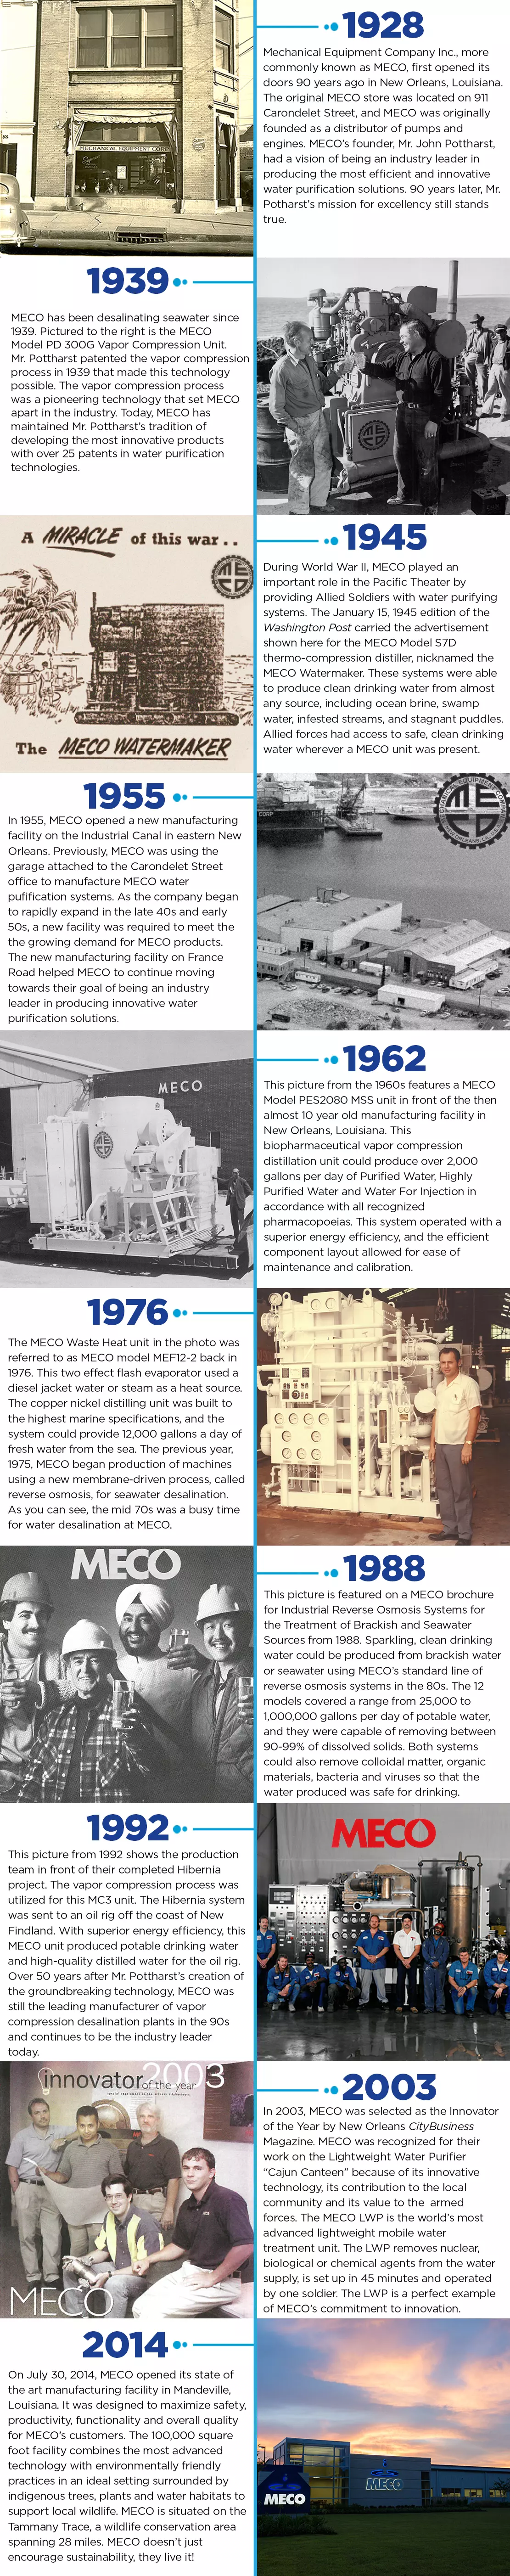 MECO through the decades_Timeline_9